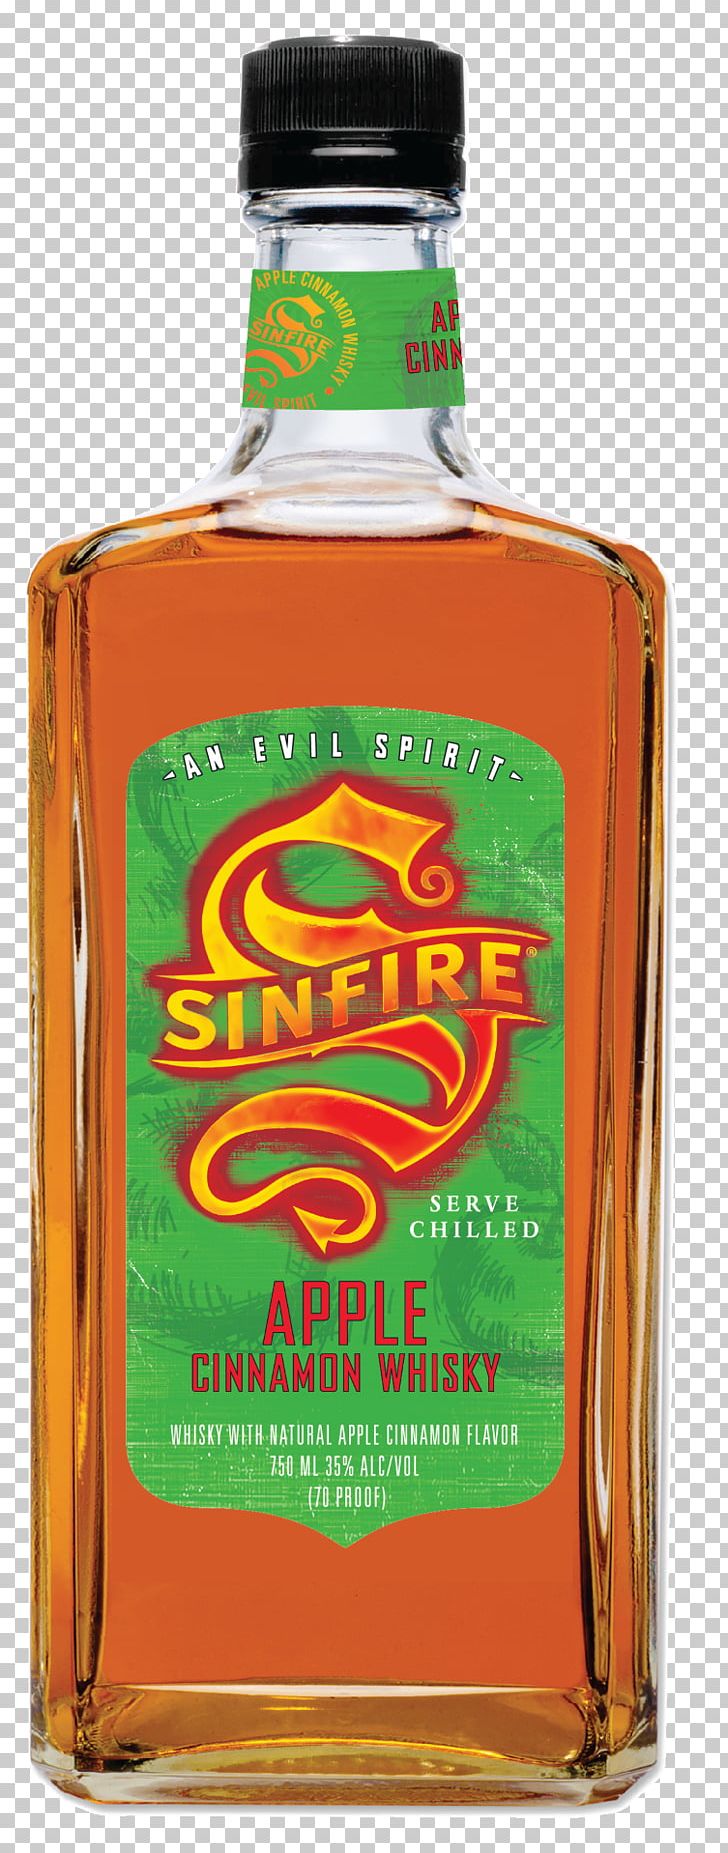 Sinfire Fireball Cinnamon Whisky Whiskey Canadian Whisky Liquor PNG, Clipart, Alcoholic Beverage, Alcohol Proof, Blended Whiskey, Bottle, Canadian Whisky Free PNG Download